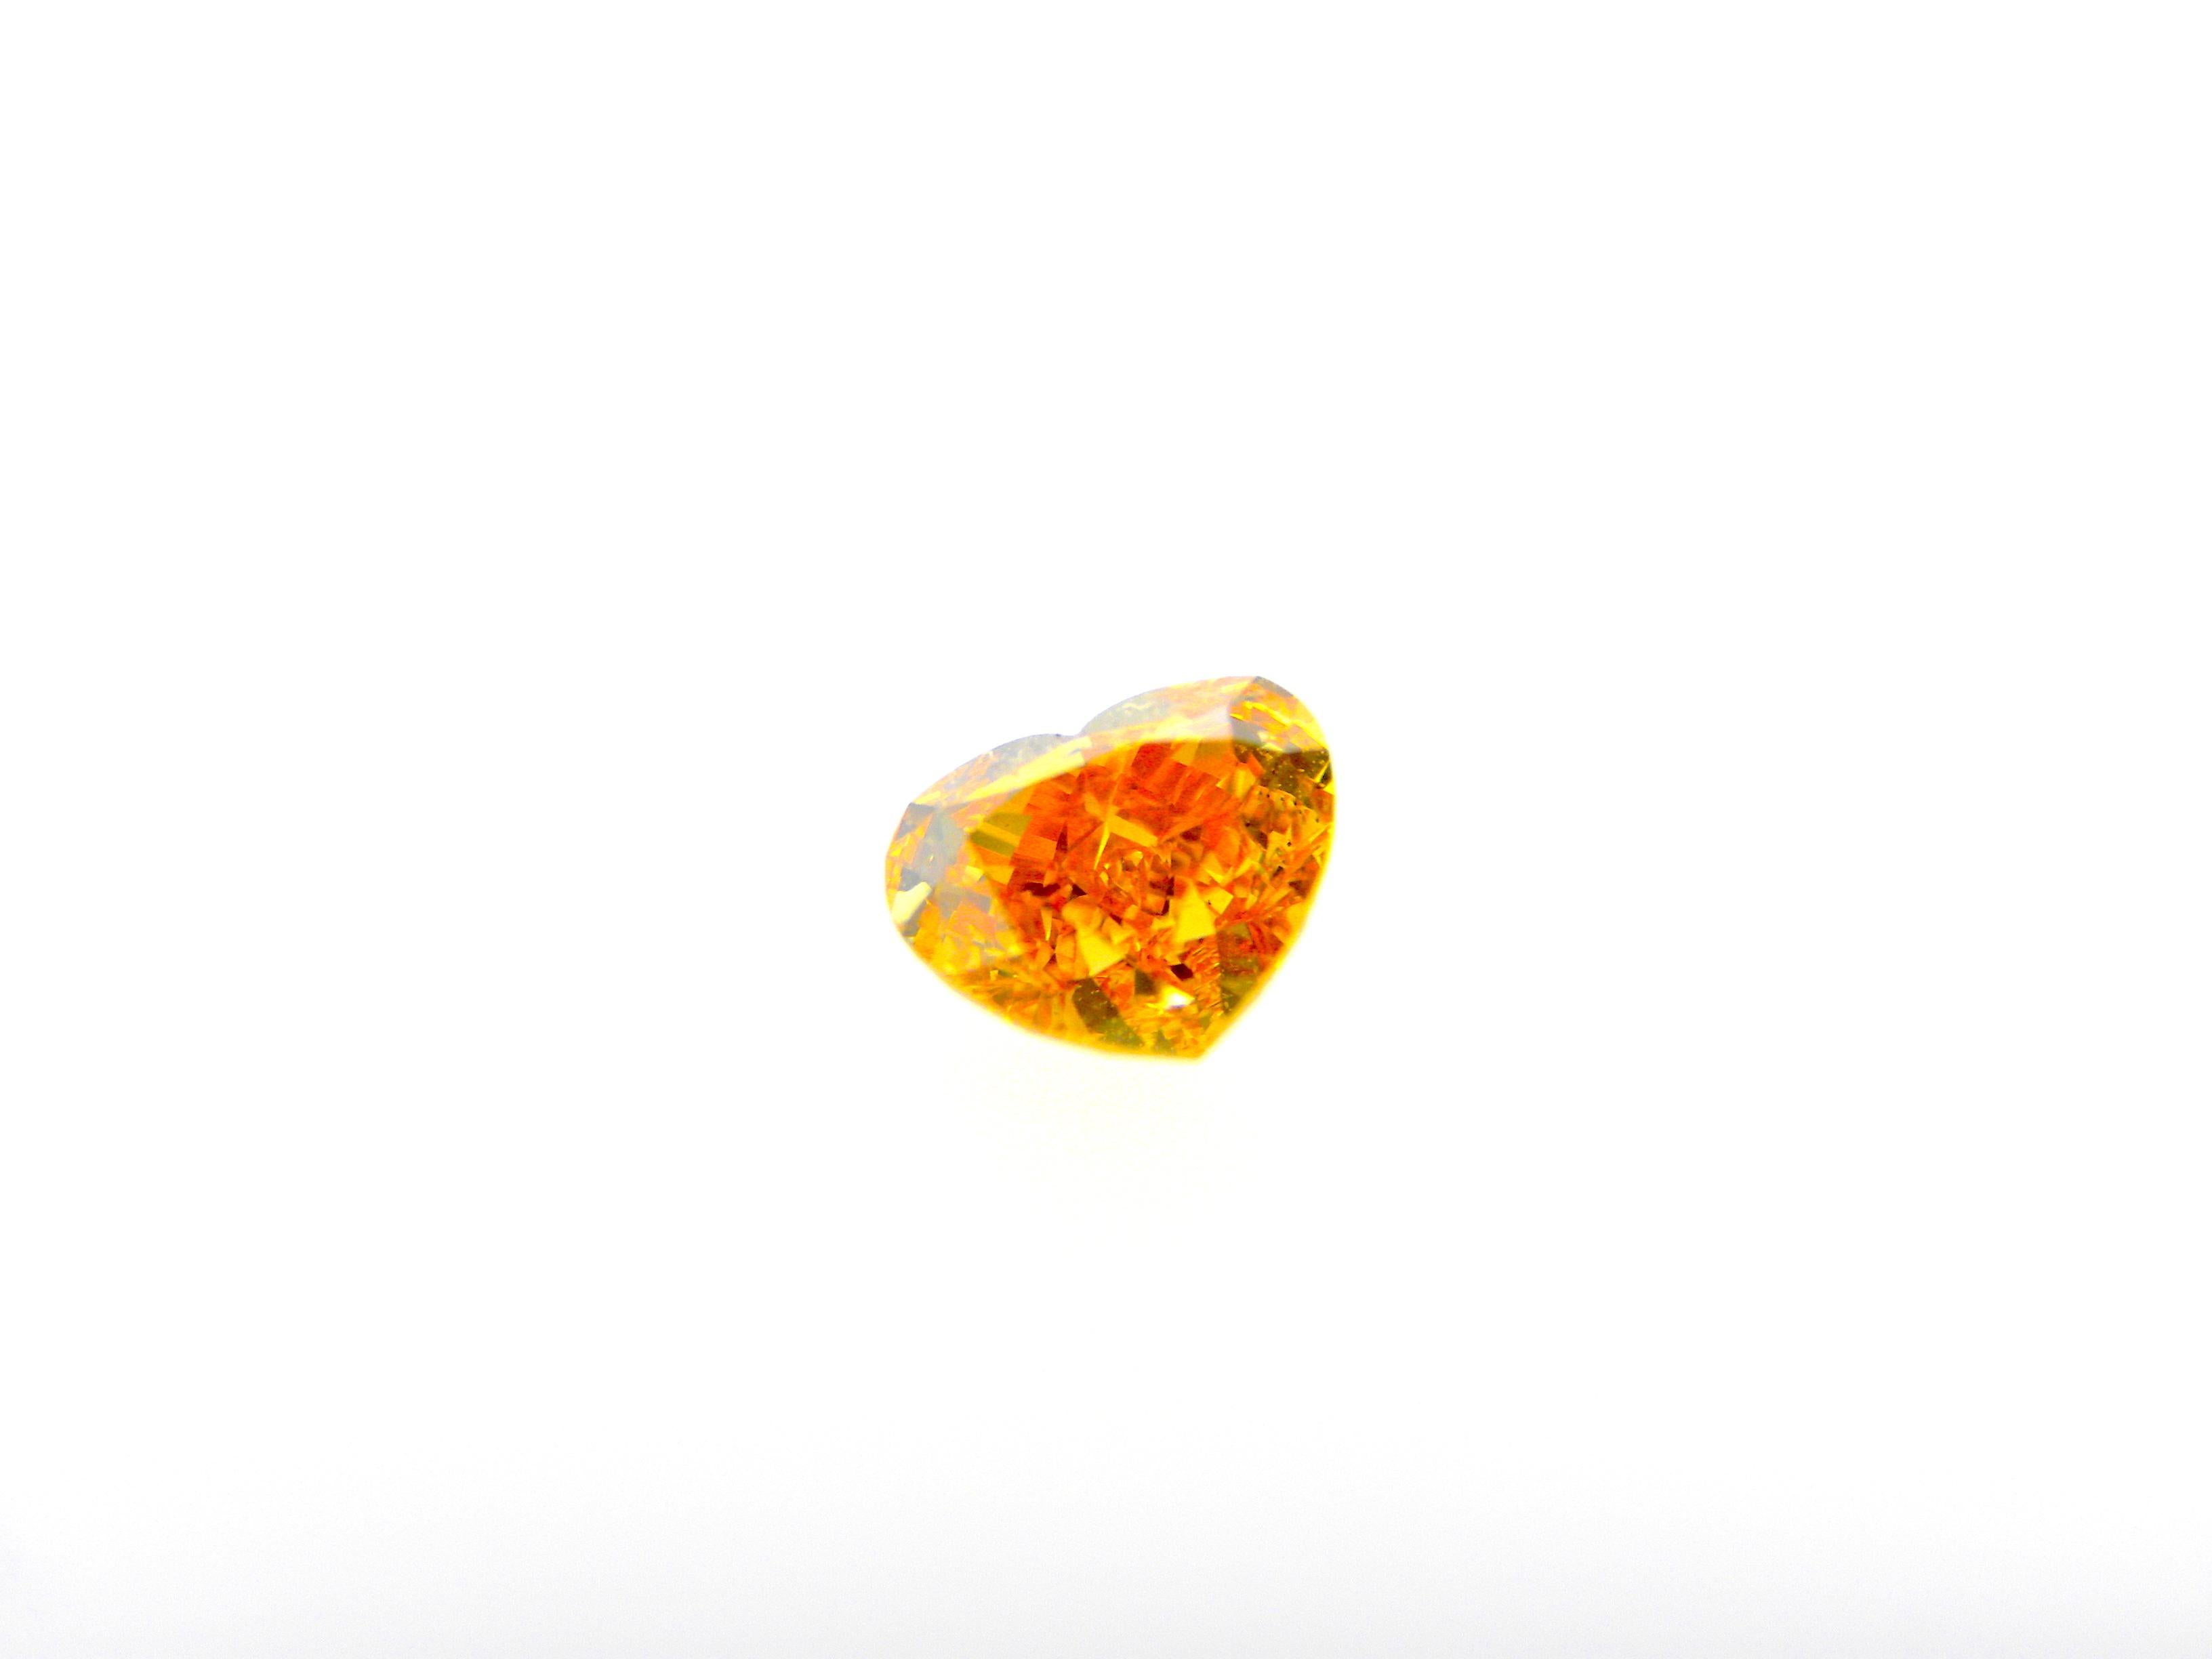 0.50 Carat GIA Certified Fancy Vivid Yellowish Orange Heart-Shaped Diamond:

An extremely rare gem, it is a 0.50 carat GIA certified fancy vivid yellowish orange heart-shaped diamond. The diamond possesses a vivid colour saturation of orange with a